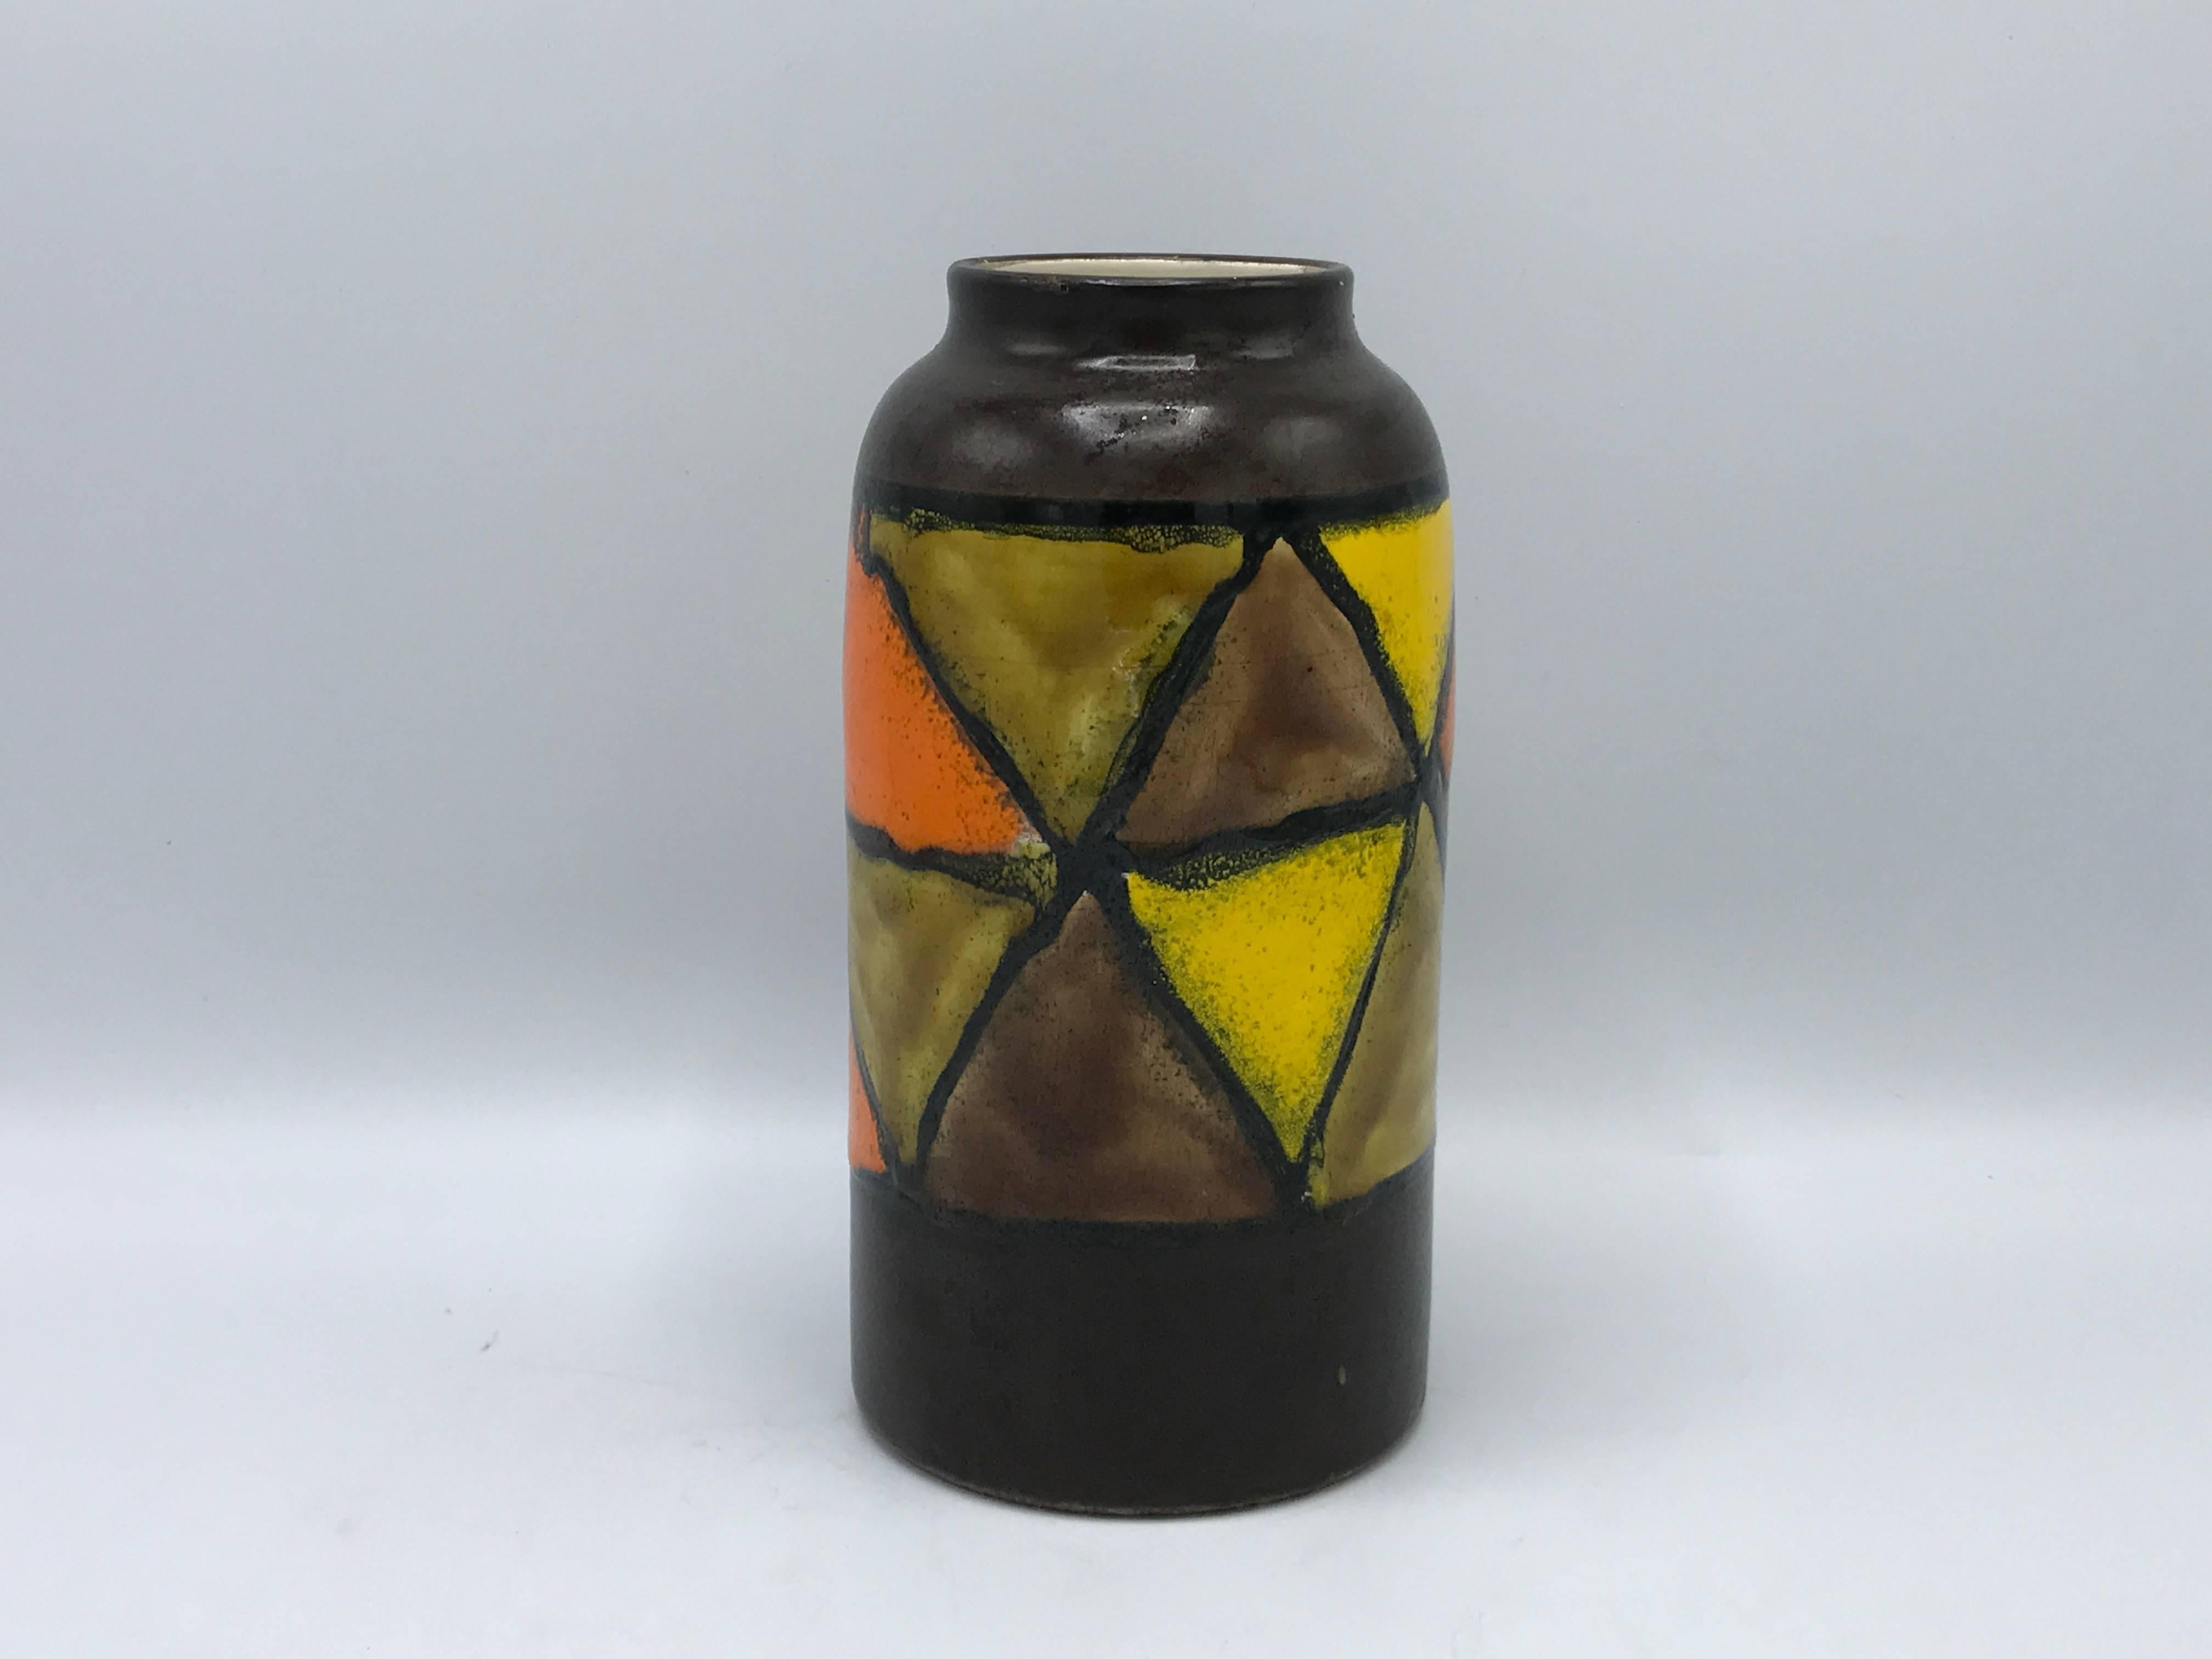 Offered is a fabulous, 1960s, Italian, Aldo Londi, Bitossi for Raymor, glazed ceramic vase. The piece has beautiful shades of orange, brown, yellow, and green. Signed on underside.